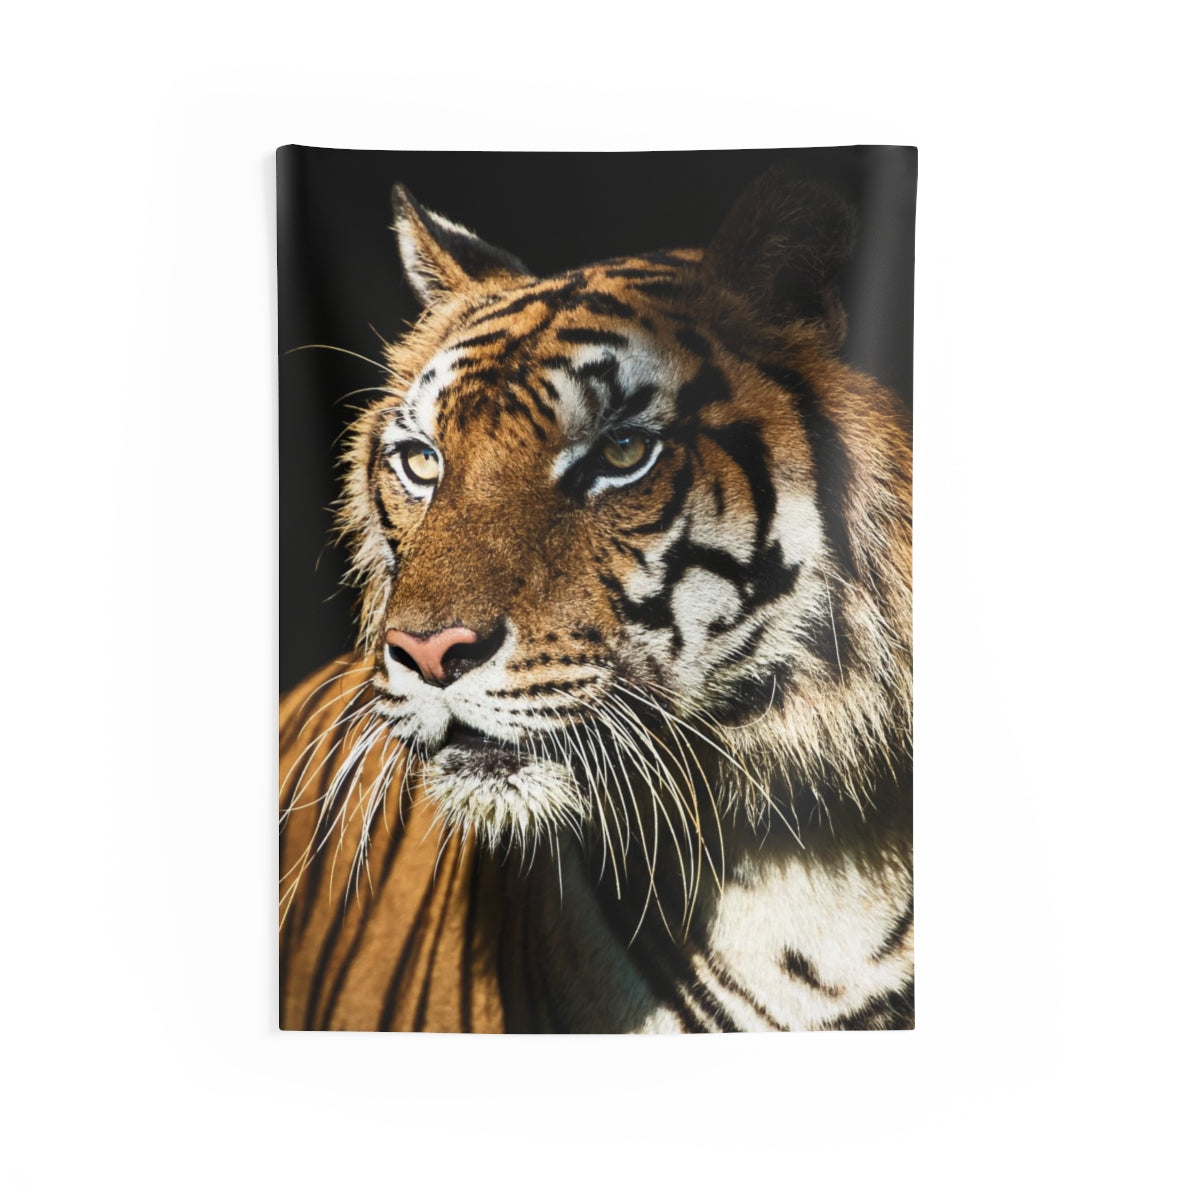 Tiger Tapestry, Big Cat Face Animal Vertical Wall Art Aesthetic Hanging Large Small Decor Home College Dorm Room Gift Starcove Fashion